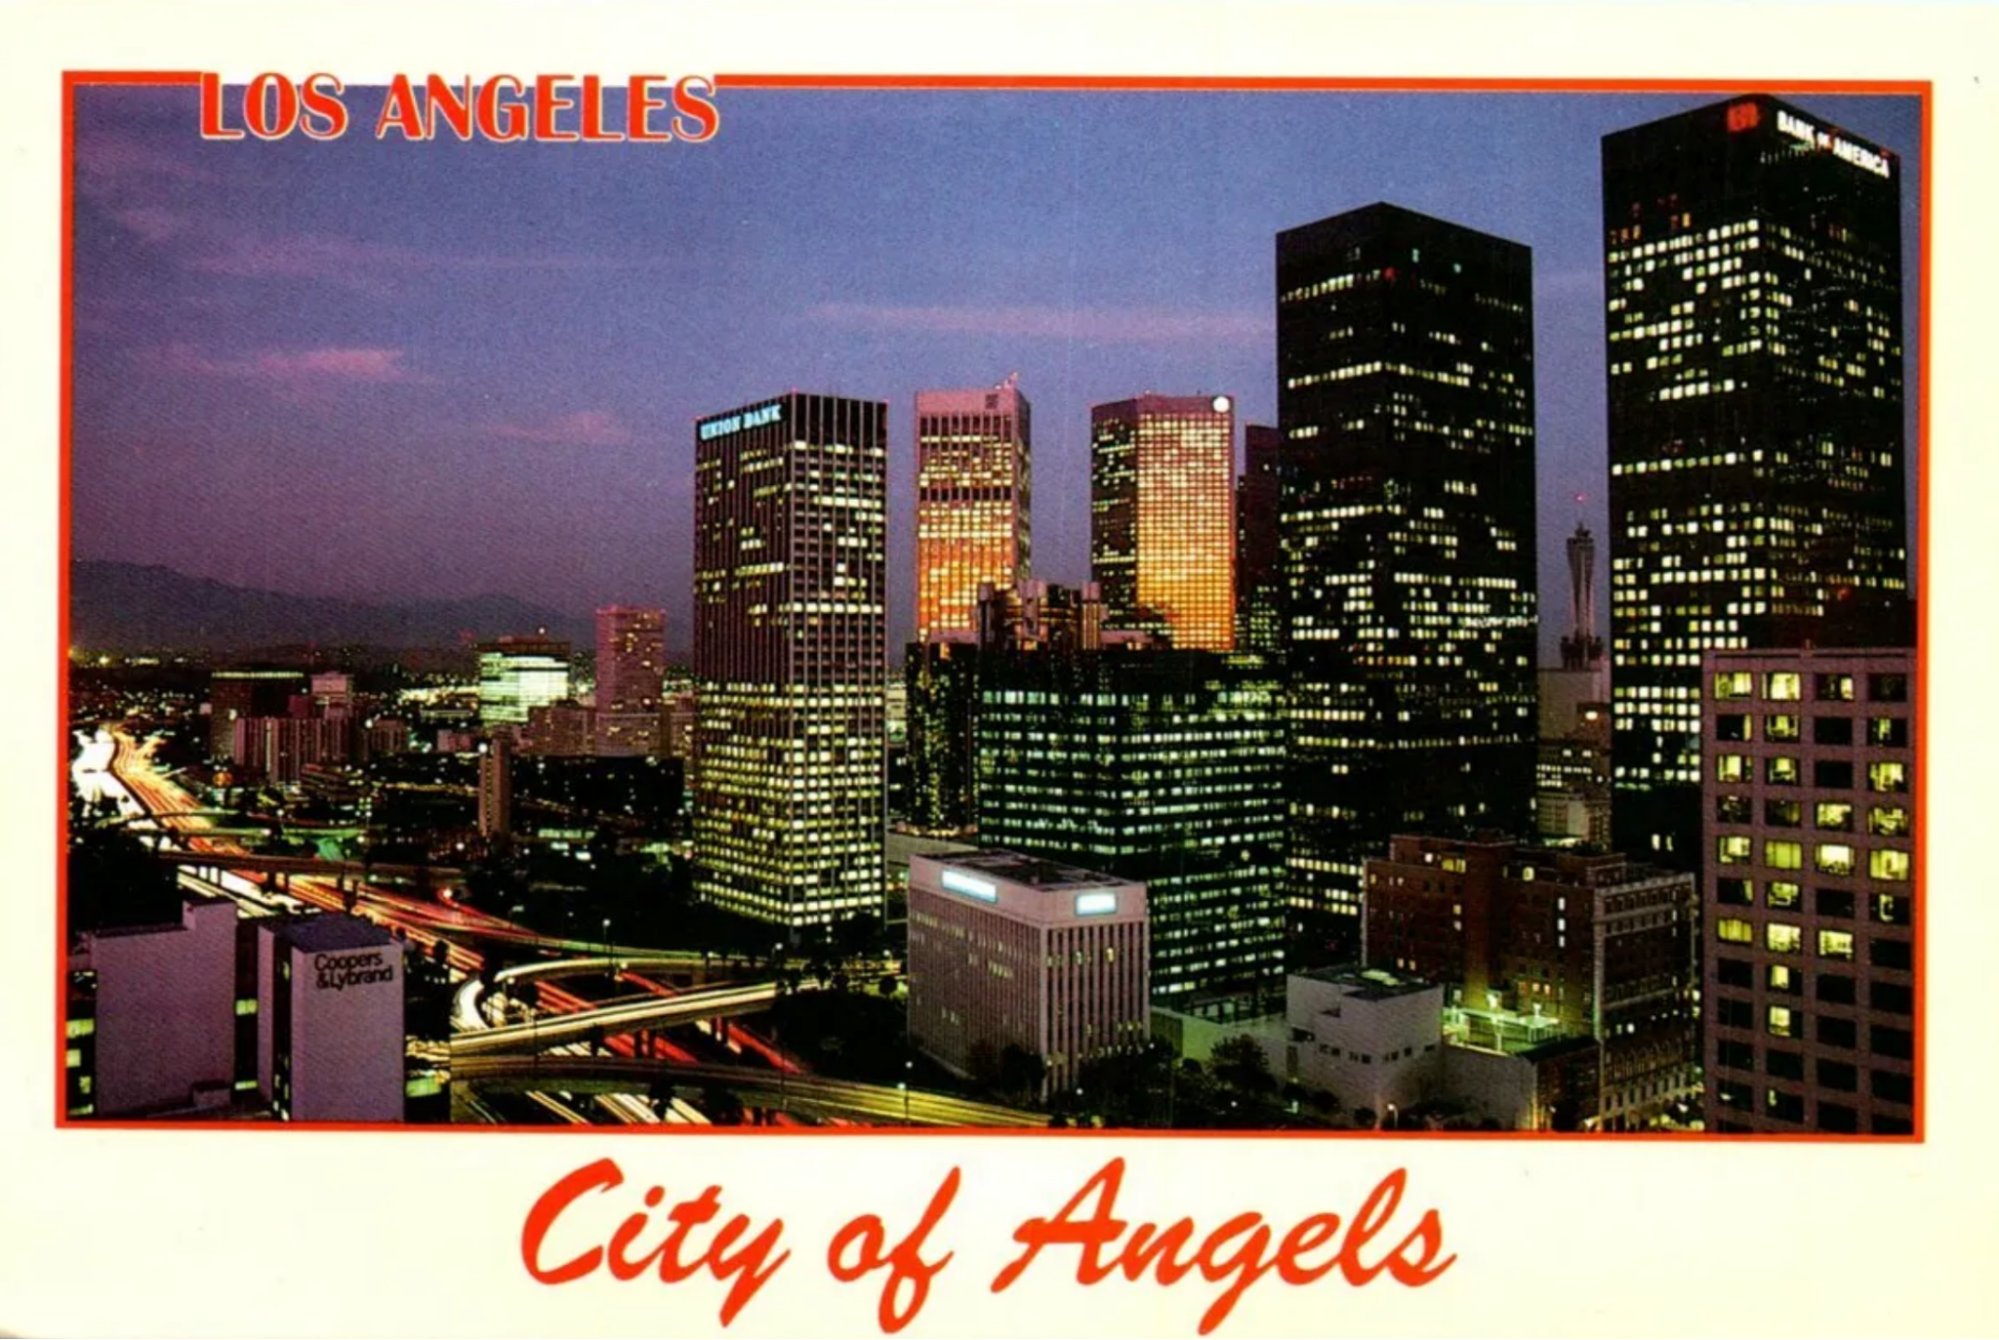 Postcard from the city of Los Angeles that reads "Los Angeles, City of Angels". Ayham Ghraowi